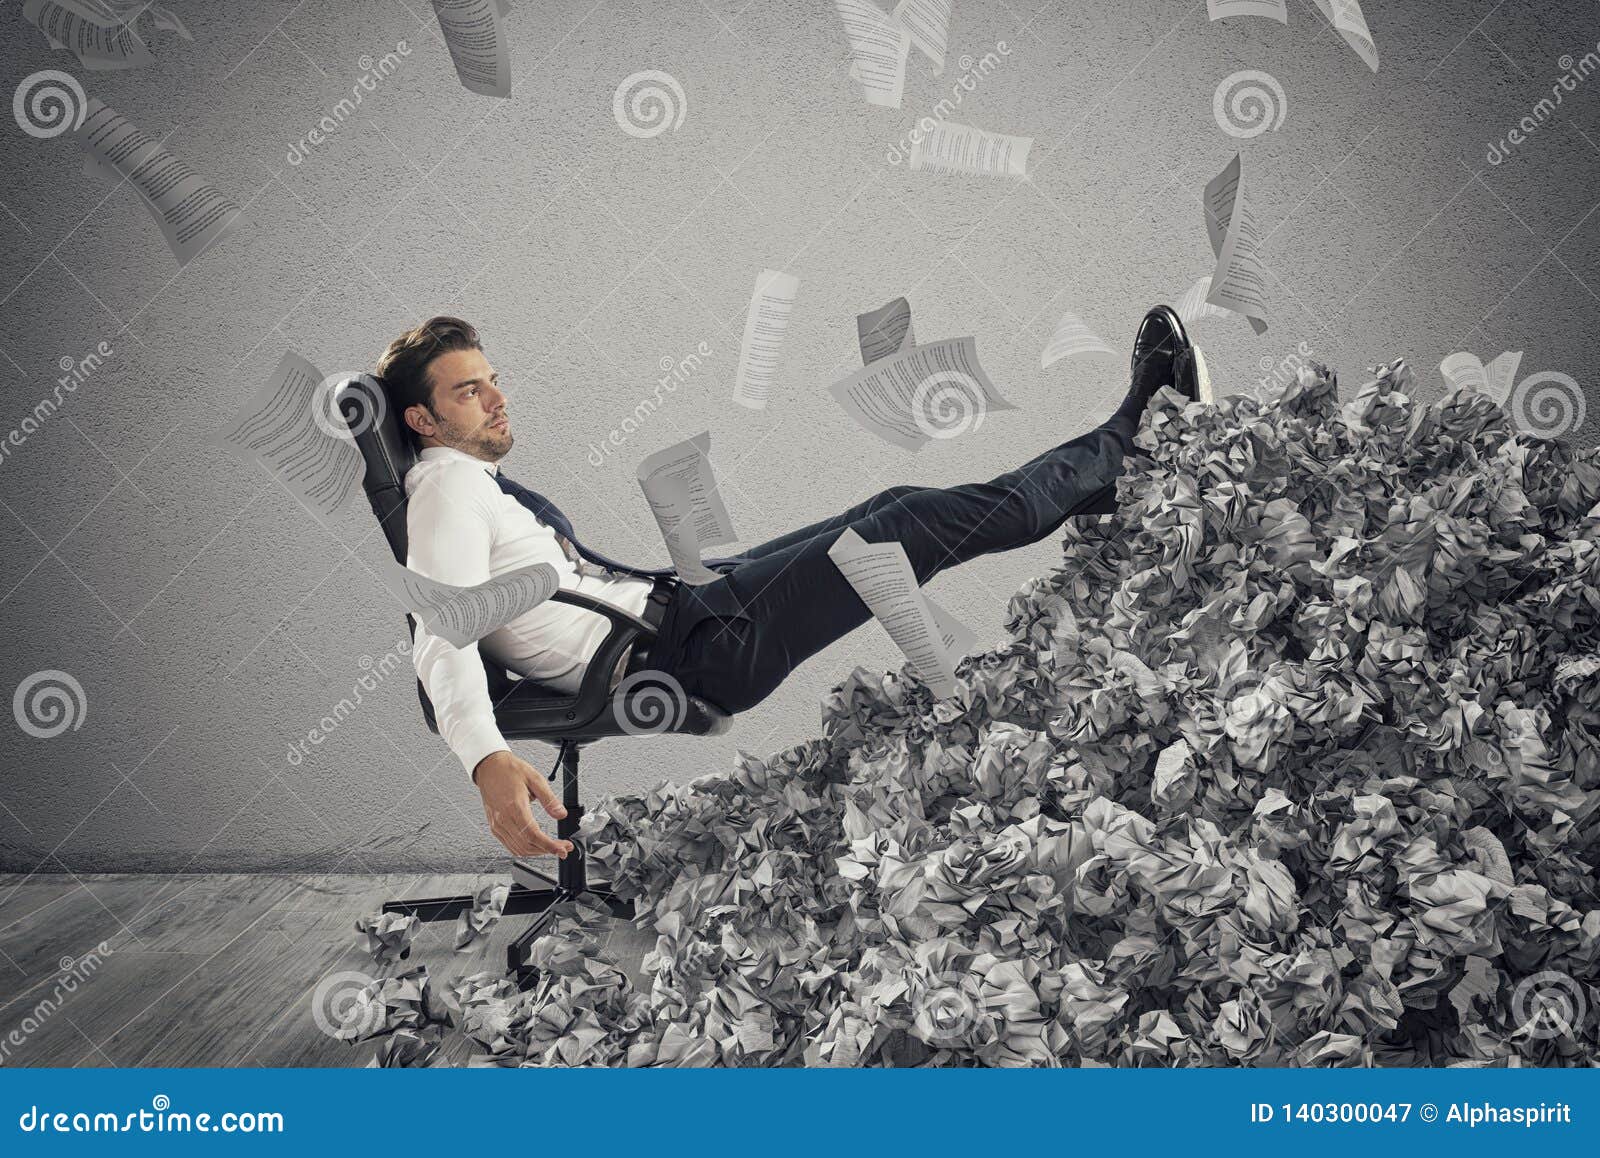 businessman with paper sheet anywhere. buried by bureaucracy. concept of overwork